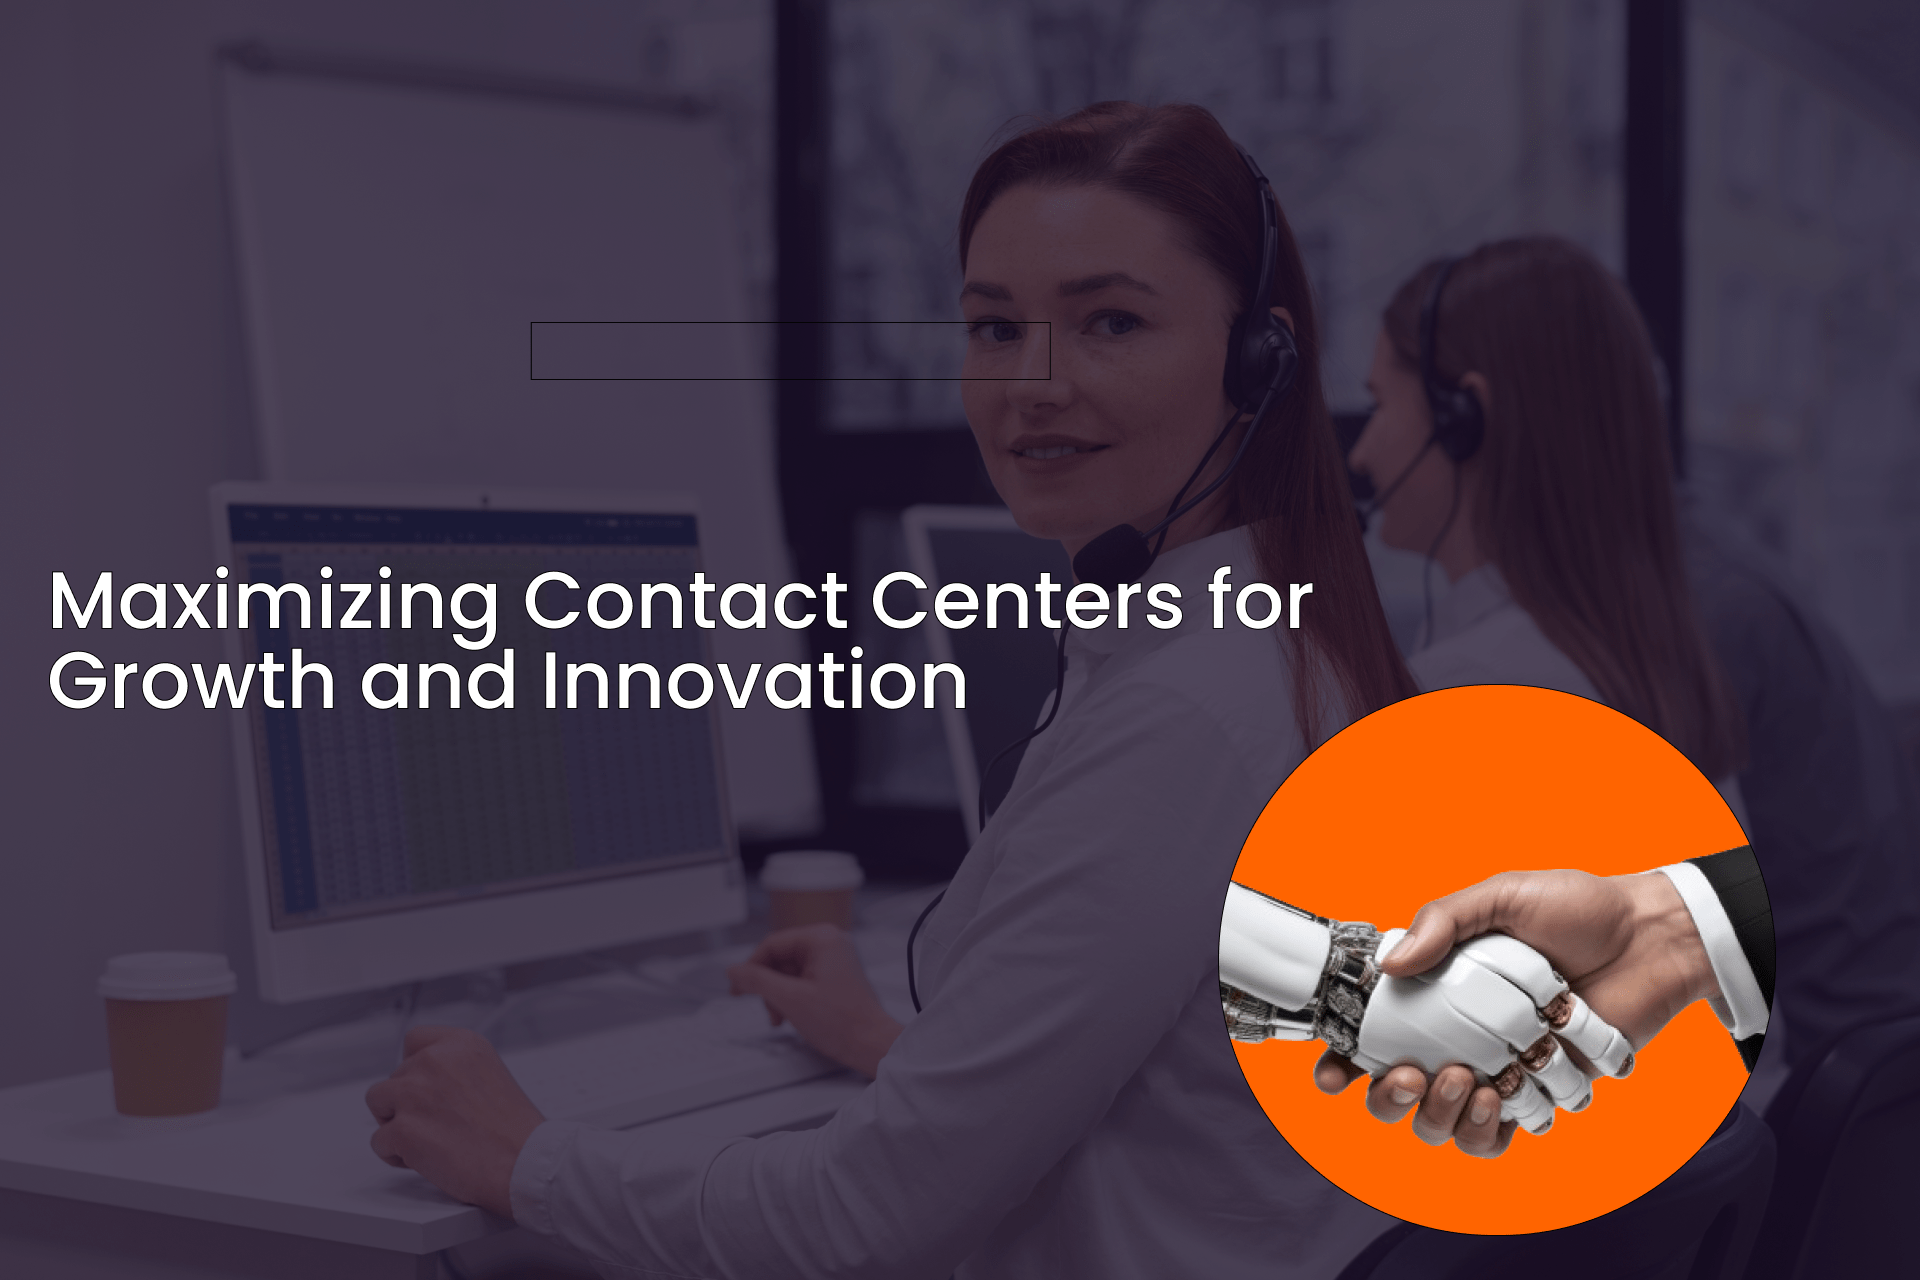 Contact centers should be viewed as value centers rather than cost centers